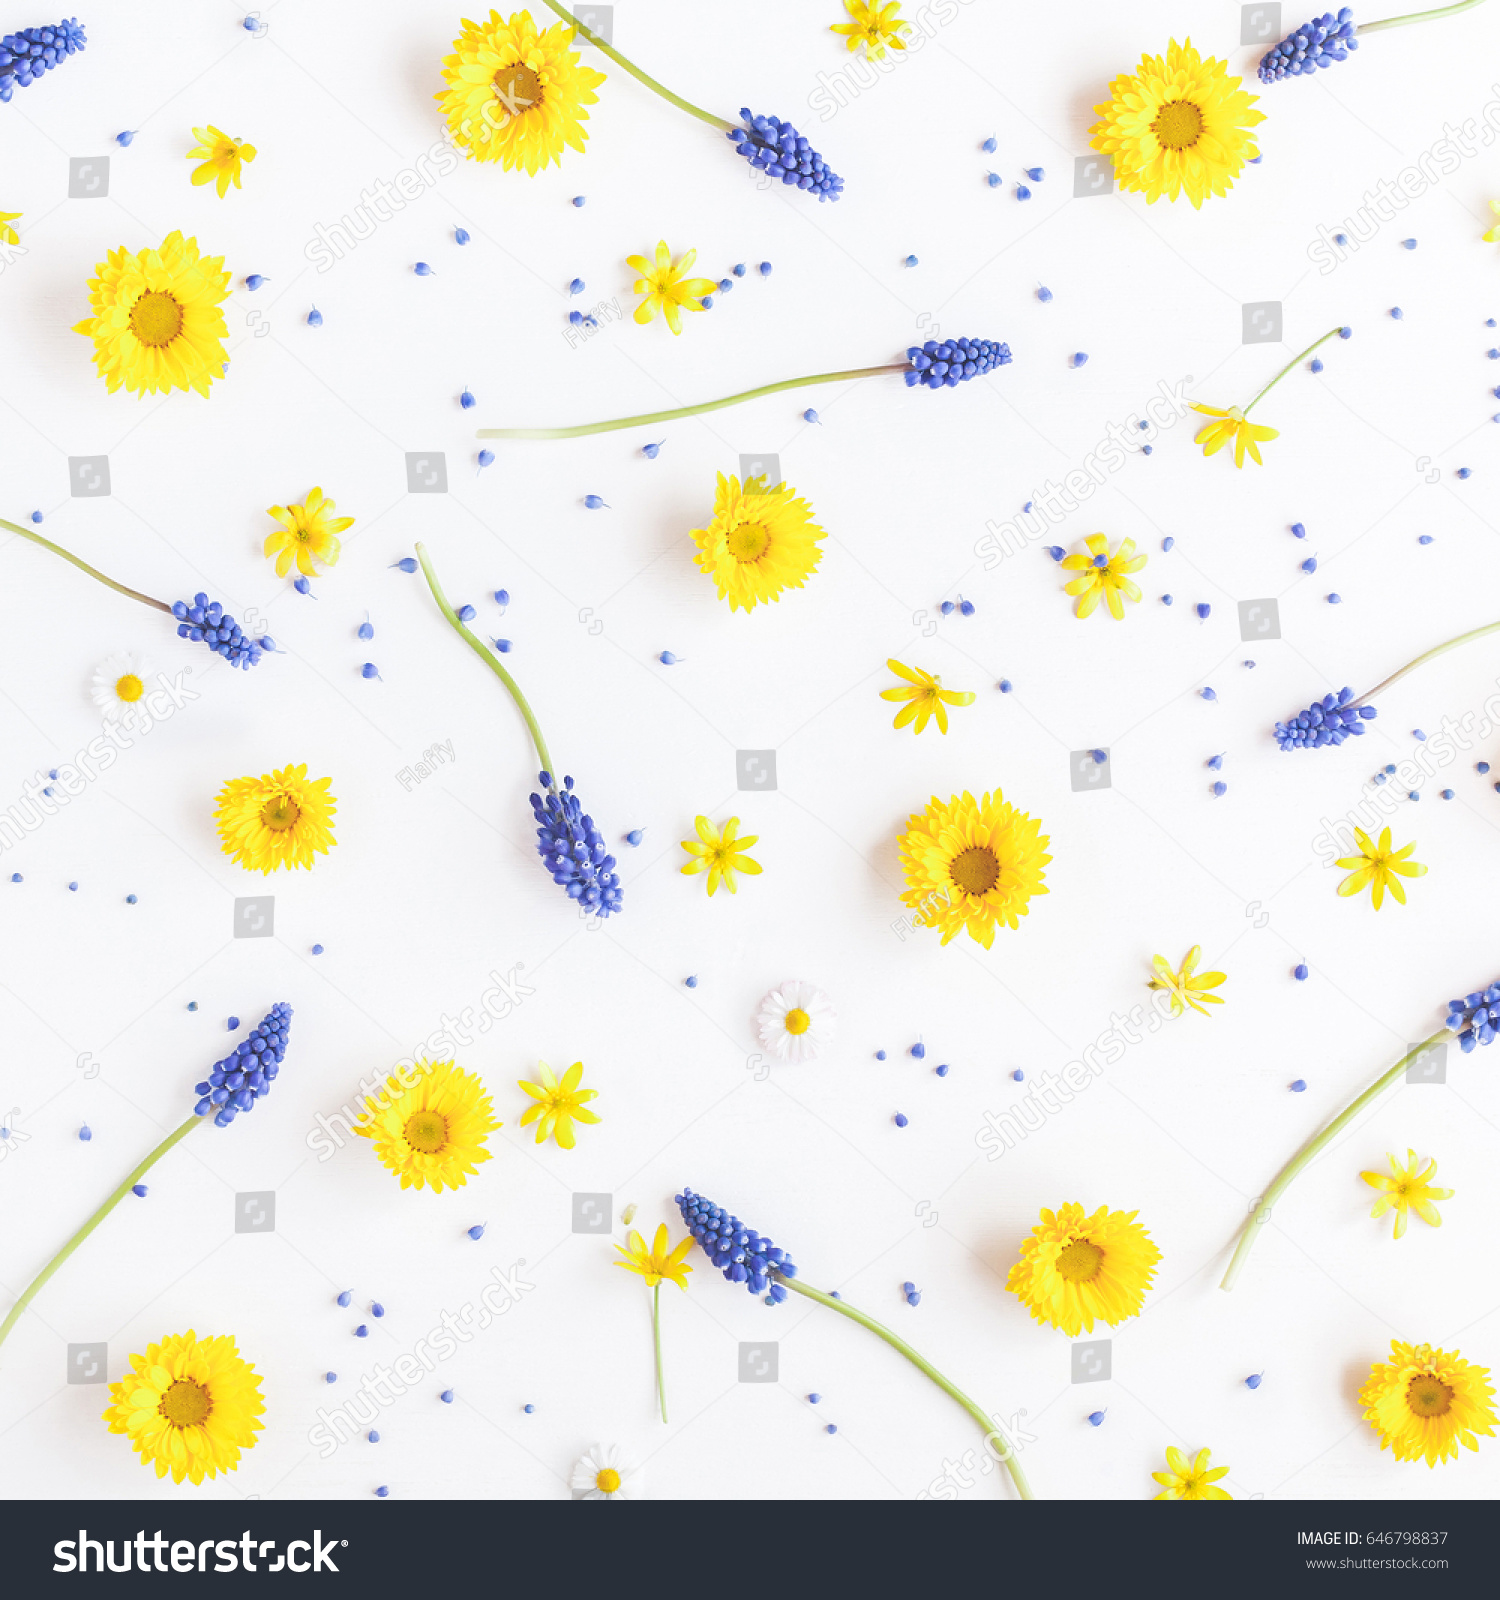 Flowers composition. Pattern made of muscari and chrysanthemum flowers on white background. Flat lay, top view #646798837